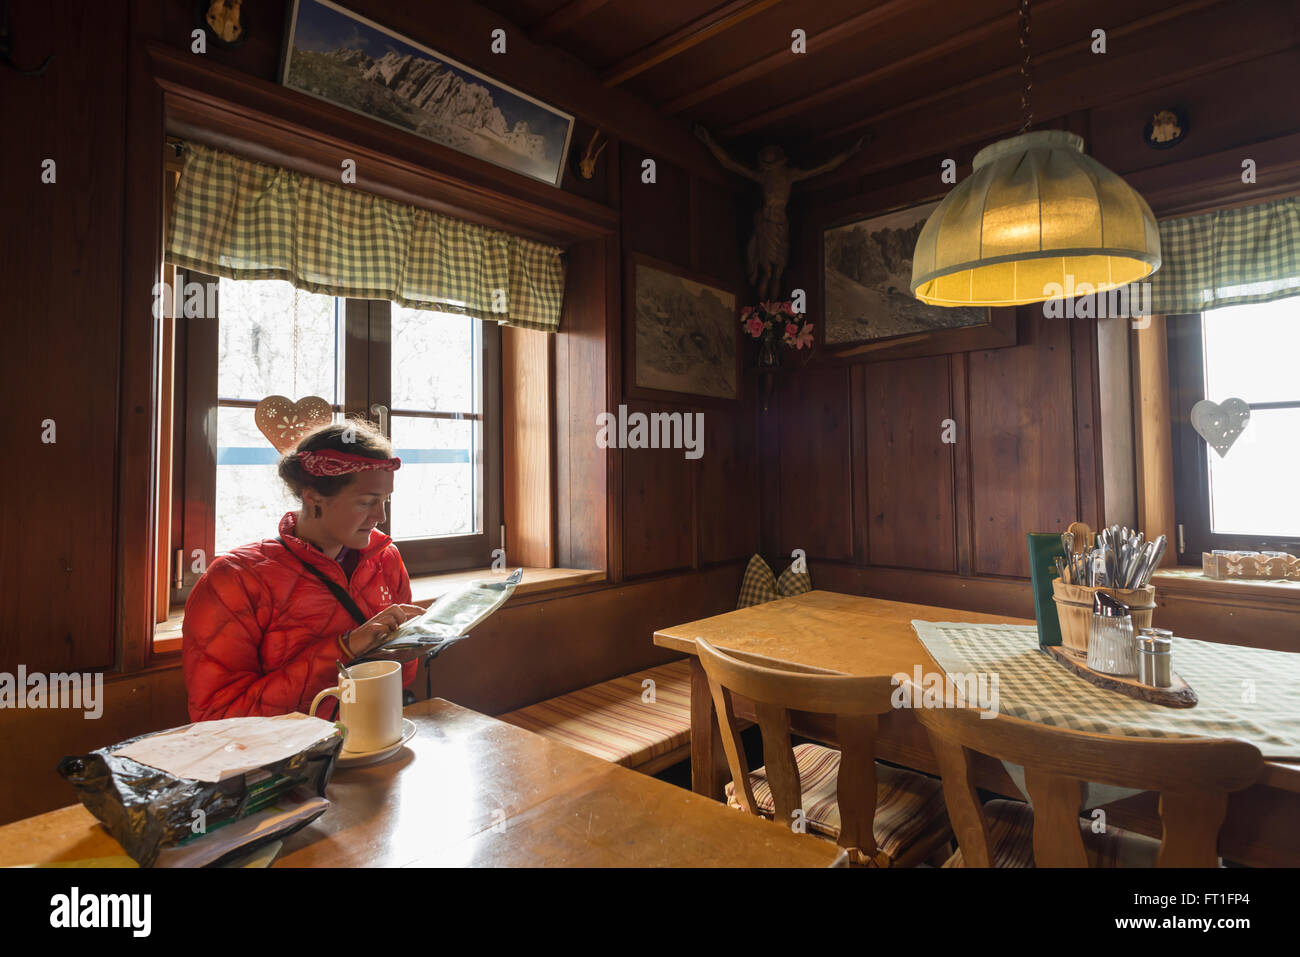 Woman studying hiking map in the traditional alpine style guest room of the Meiler hut at the Wetterstein mountains,Bavaria Stock Photo